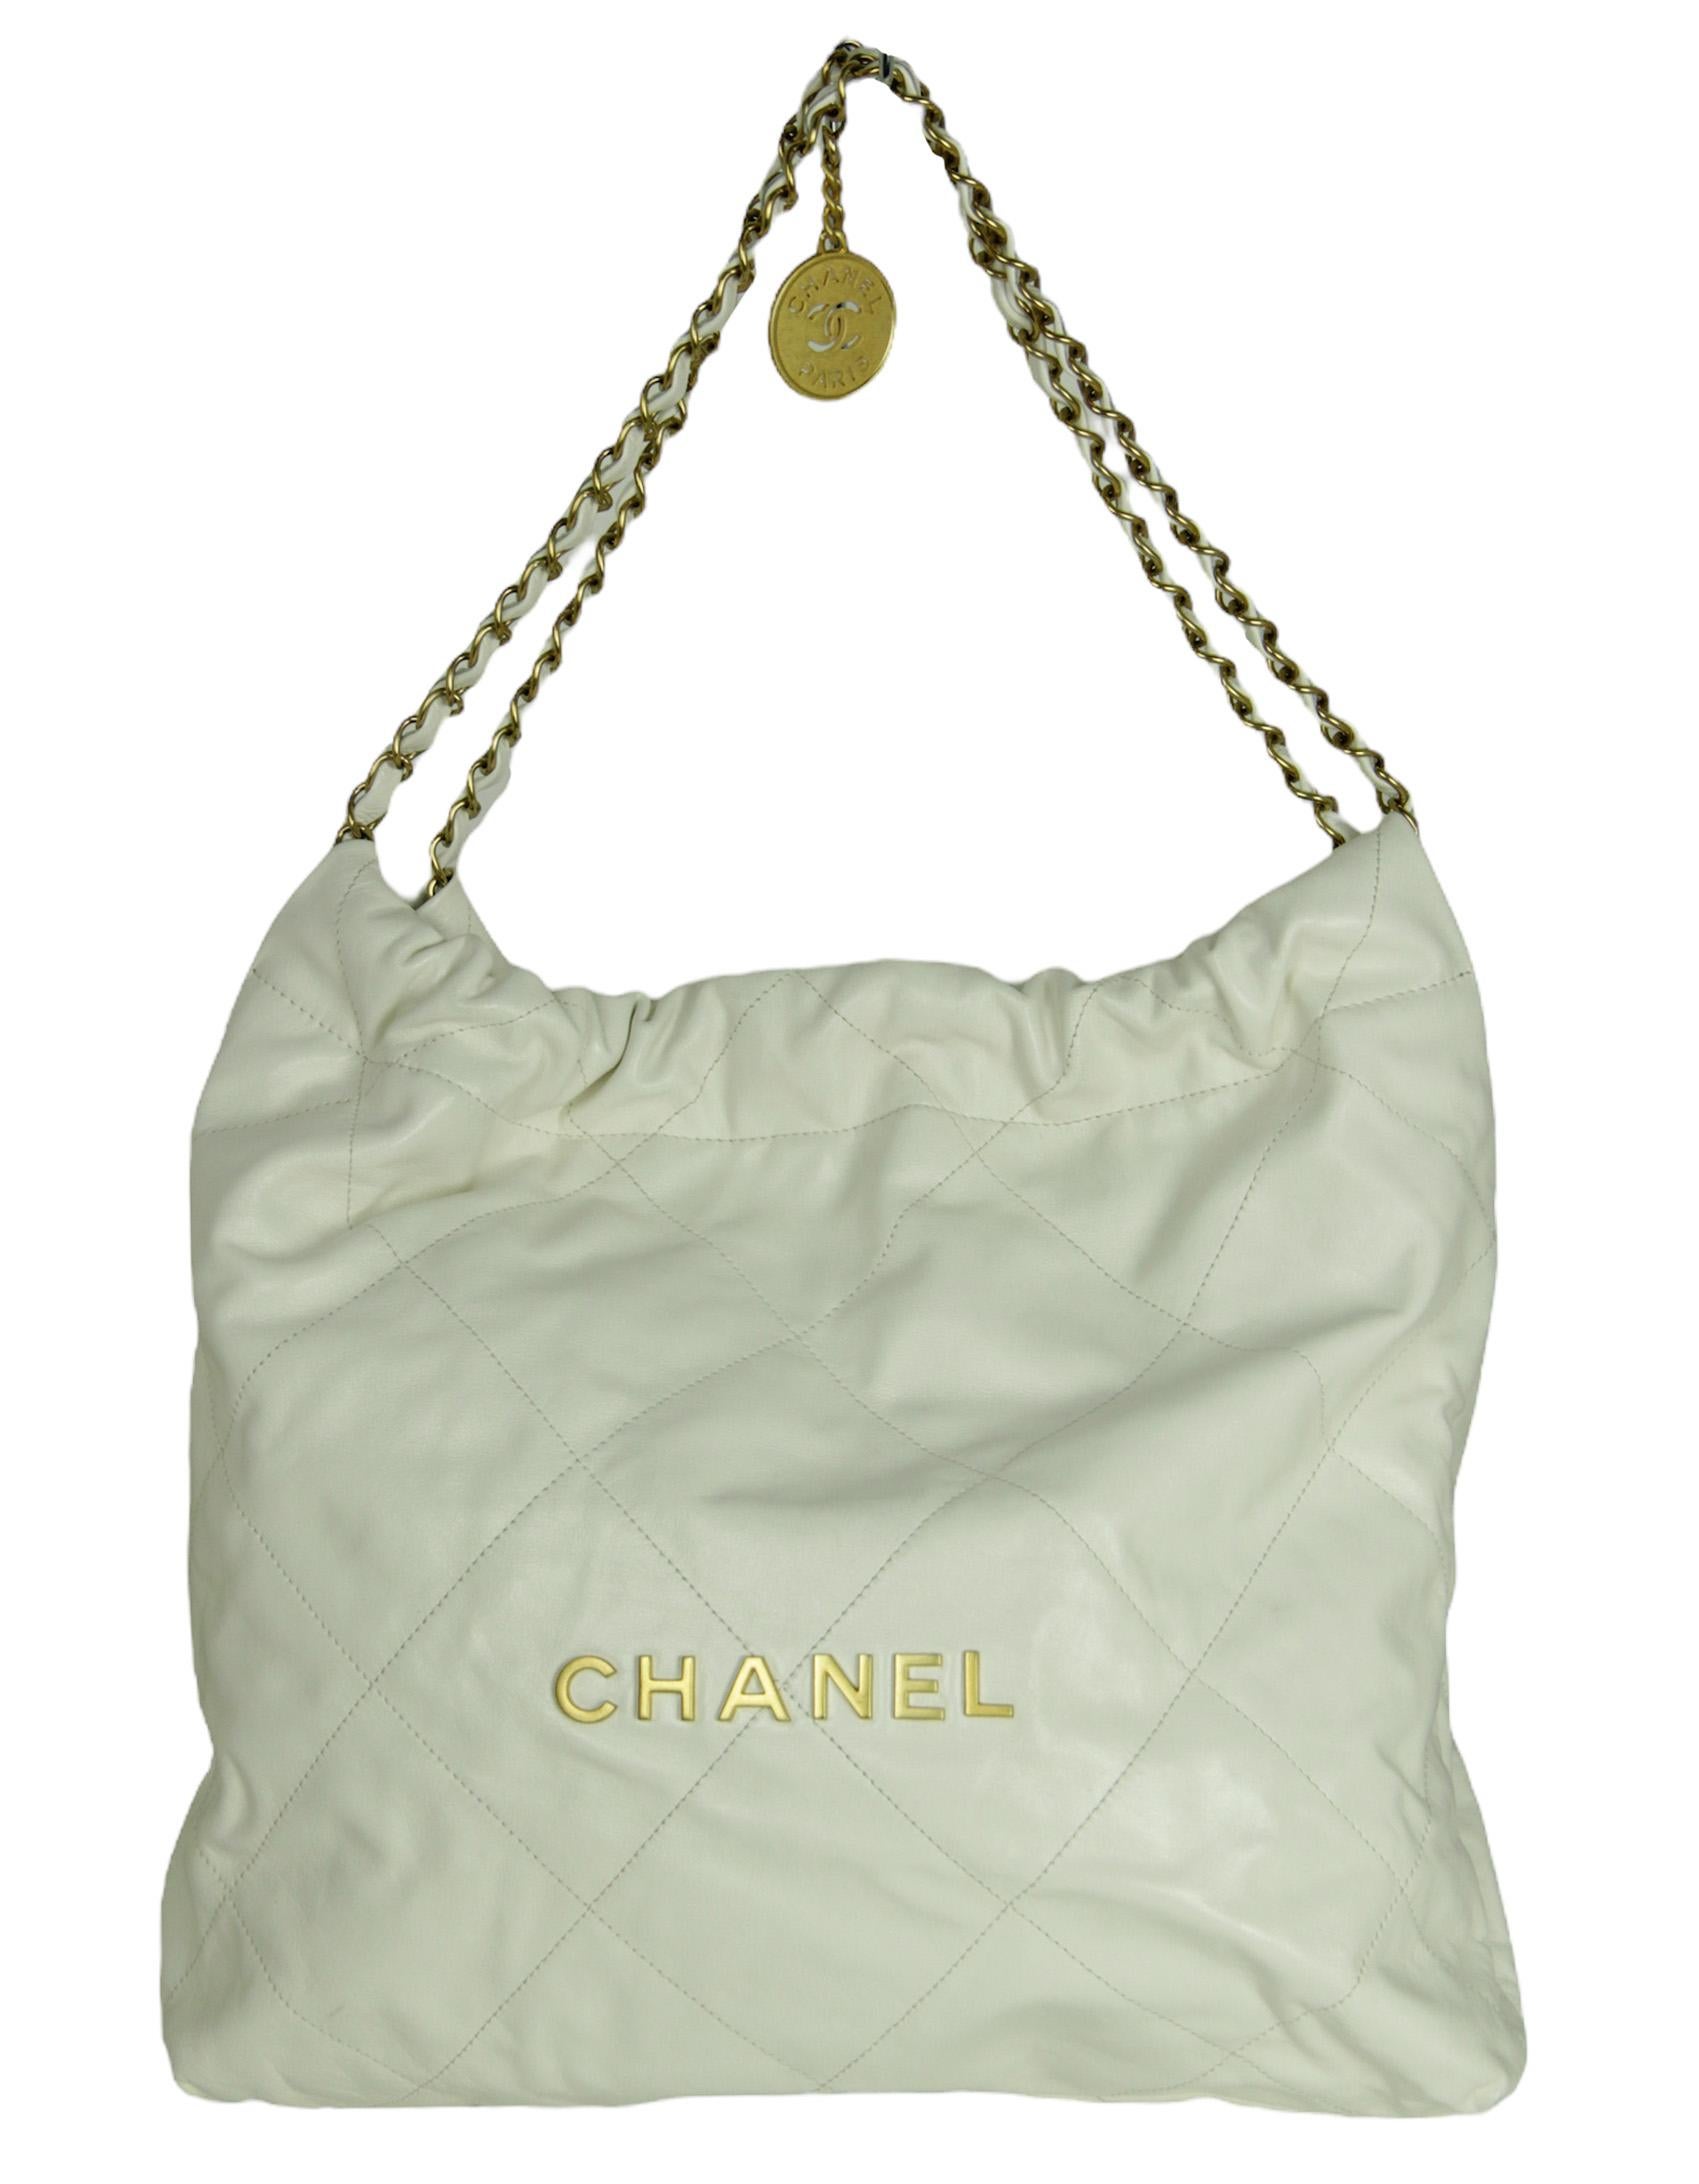 Chanel White Leather Quilted Chanel 22 Tote Bag w/ Insert For Sale